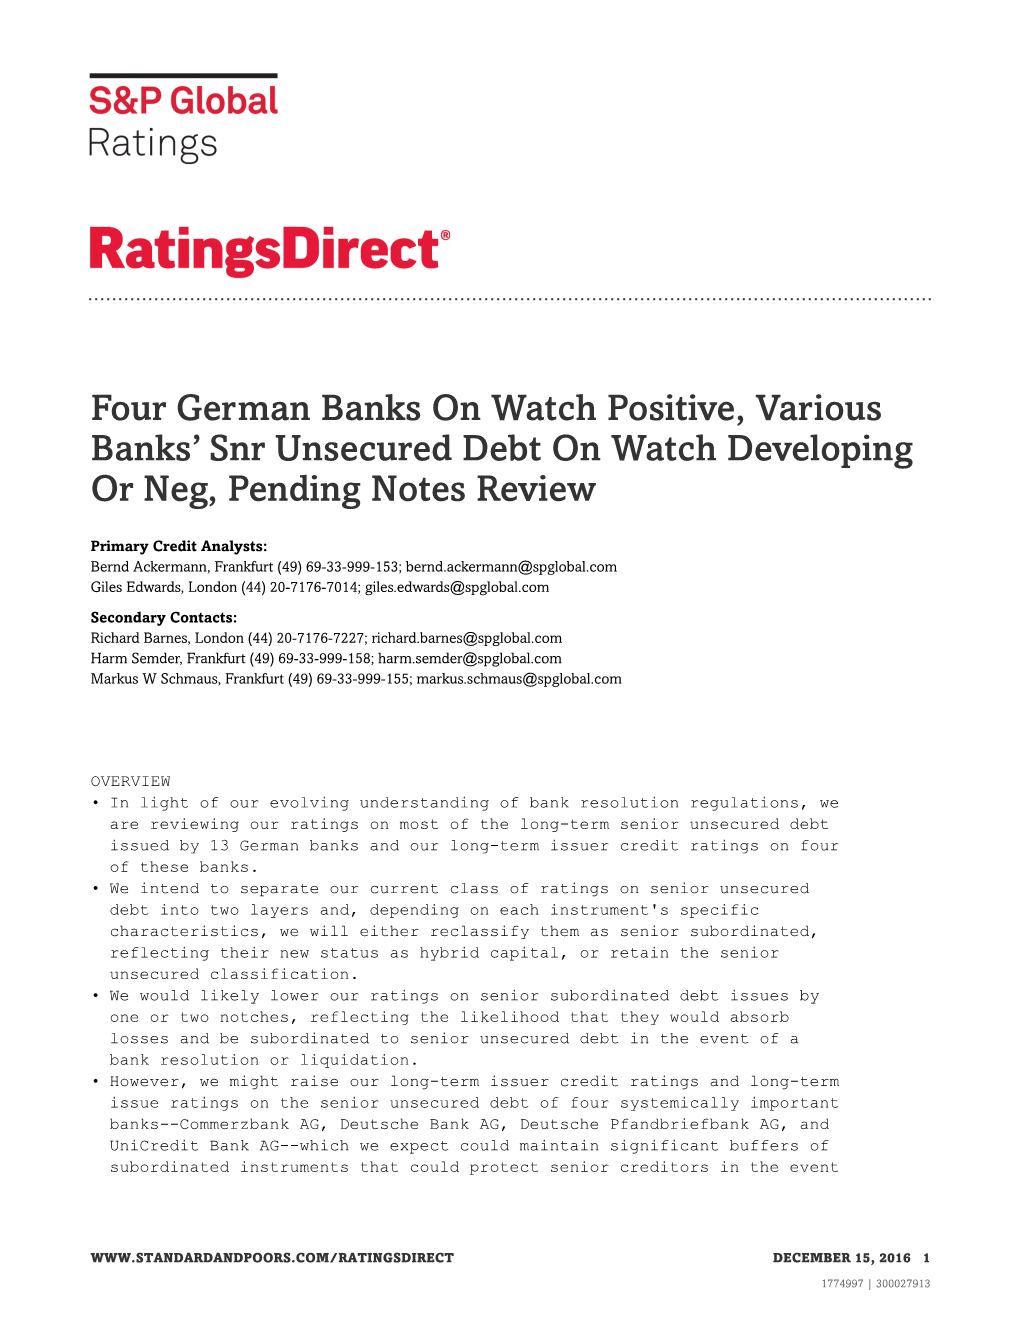 Four German Banks on Watch Positive, Various Banks' Snr Unsecured Debt on Watch Developing Or Neg, Pending Notes Review